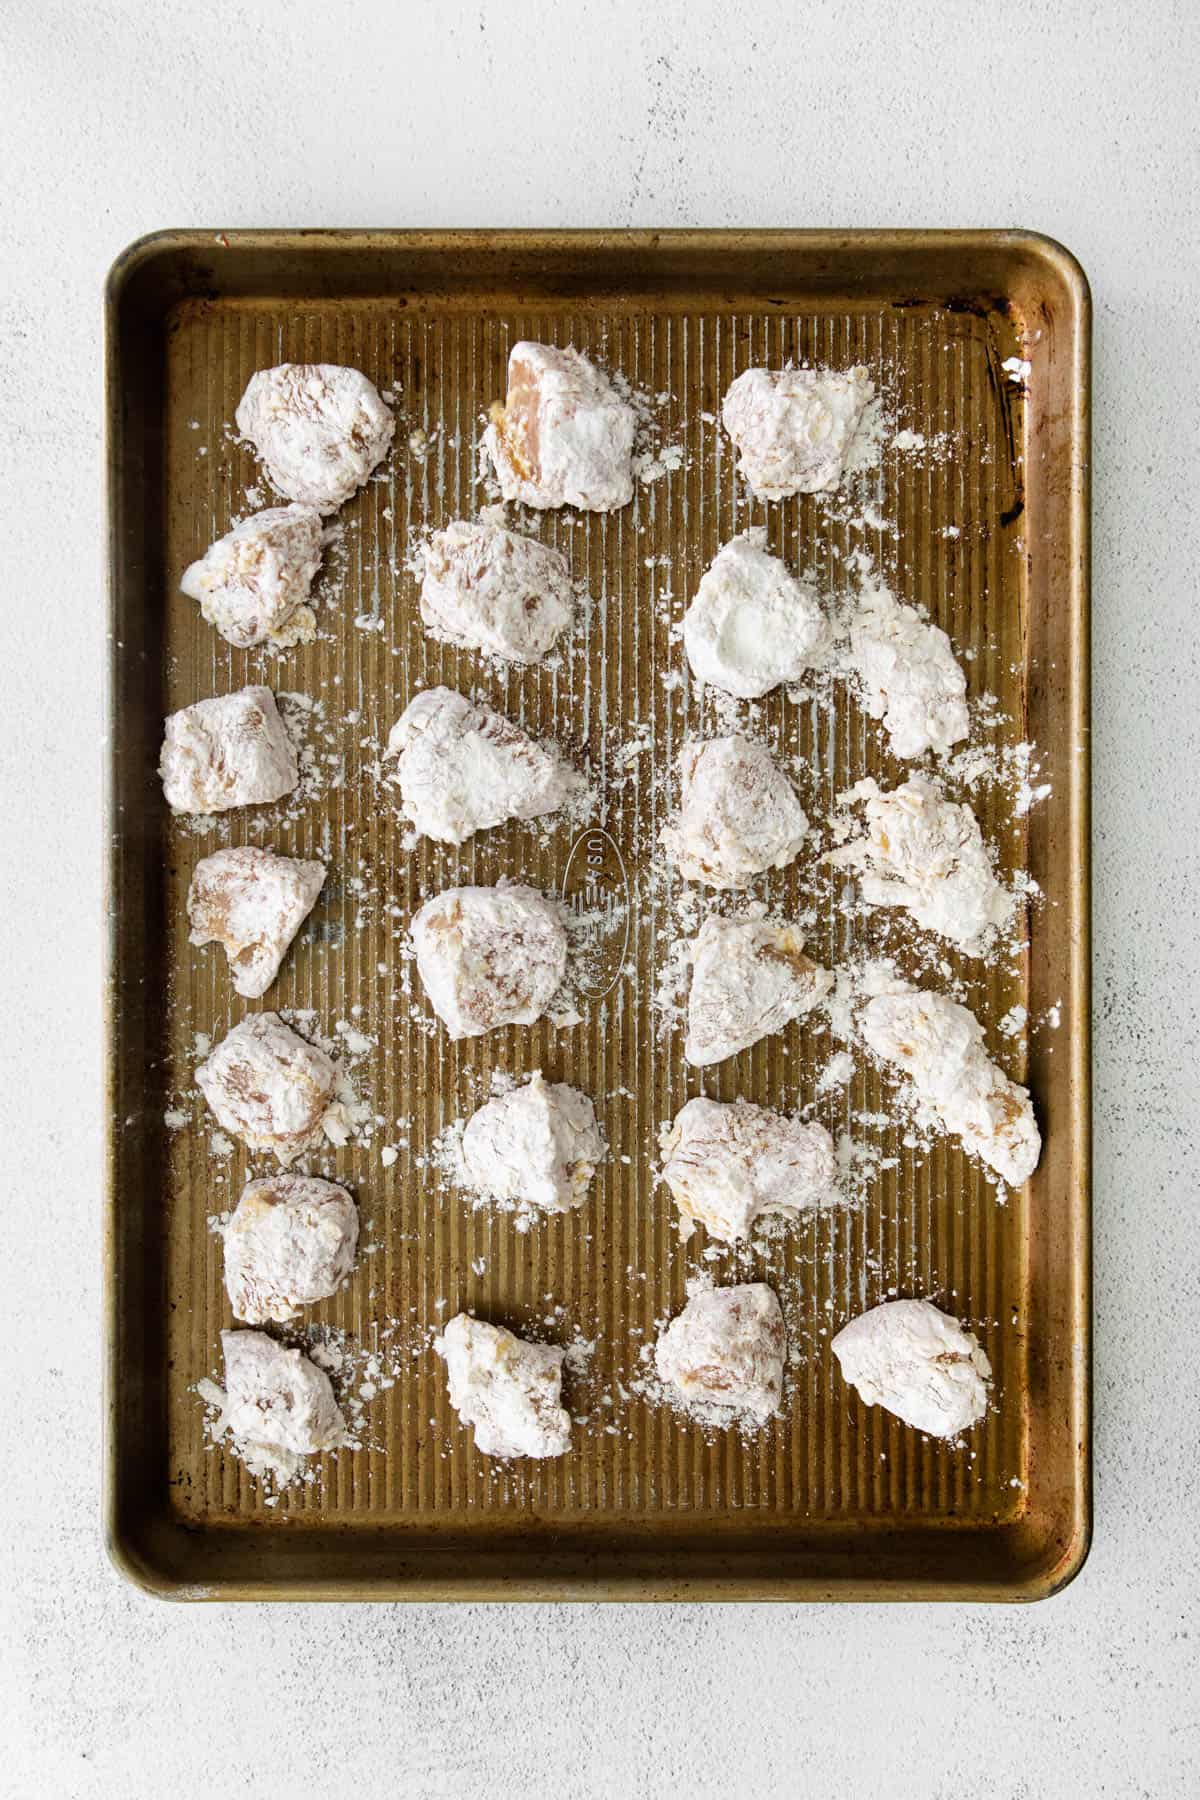 Bite-size chicken pieces arranged in a single layer on a baking sheet.